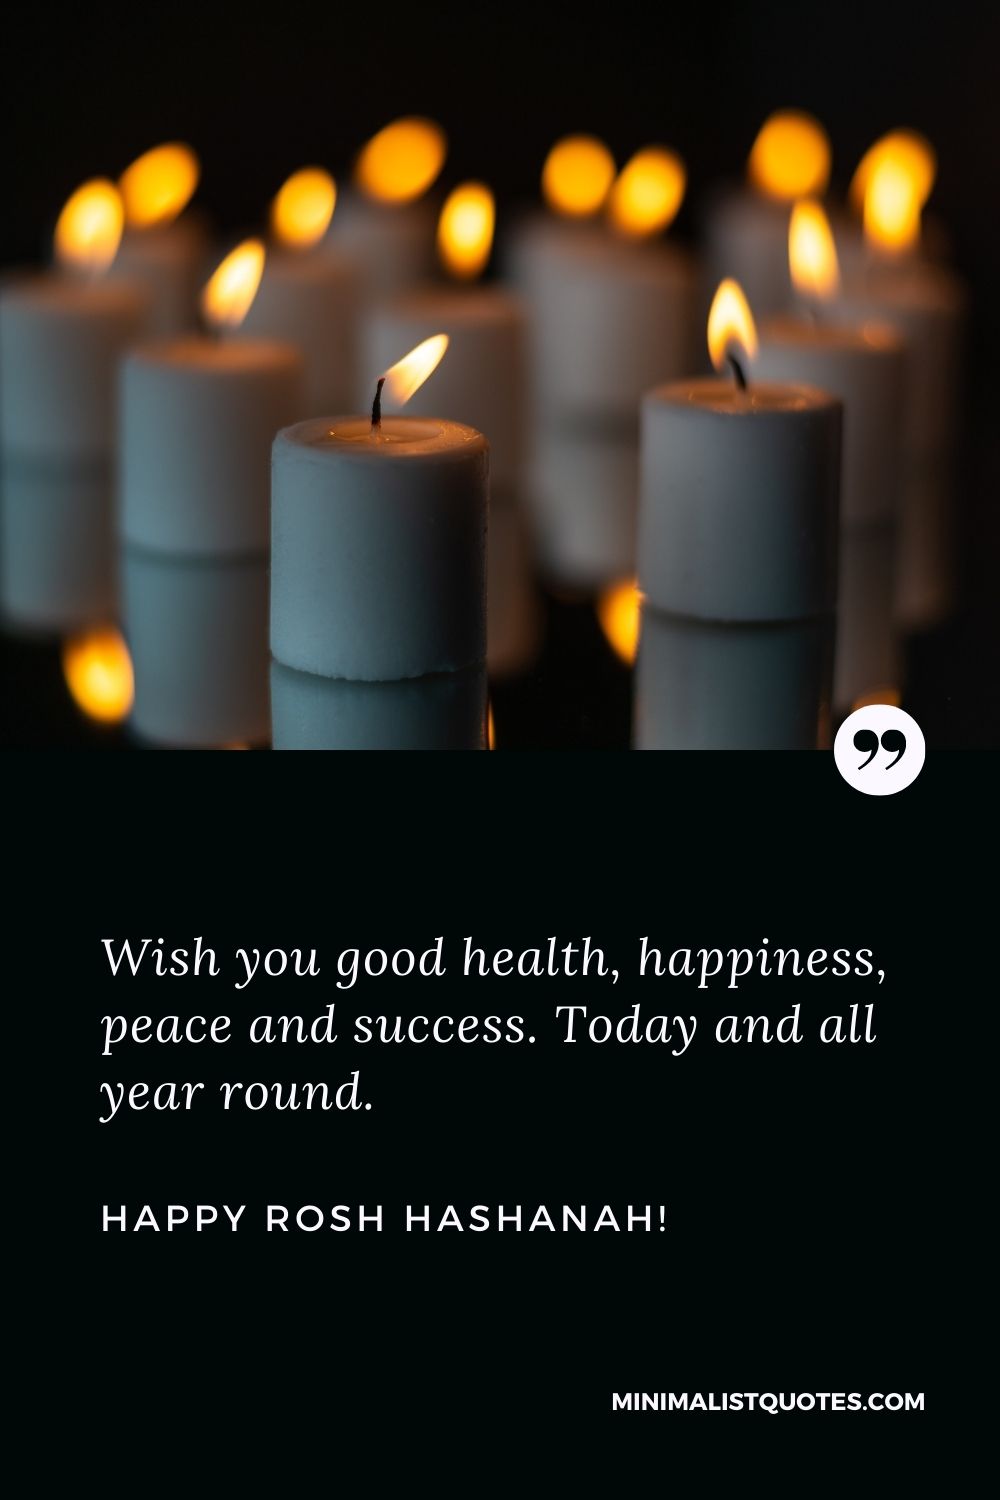 Wish You Good Health Happiness Peace And Success Today And All Year Round Happy Rosh Hashanah